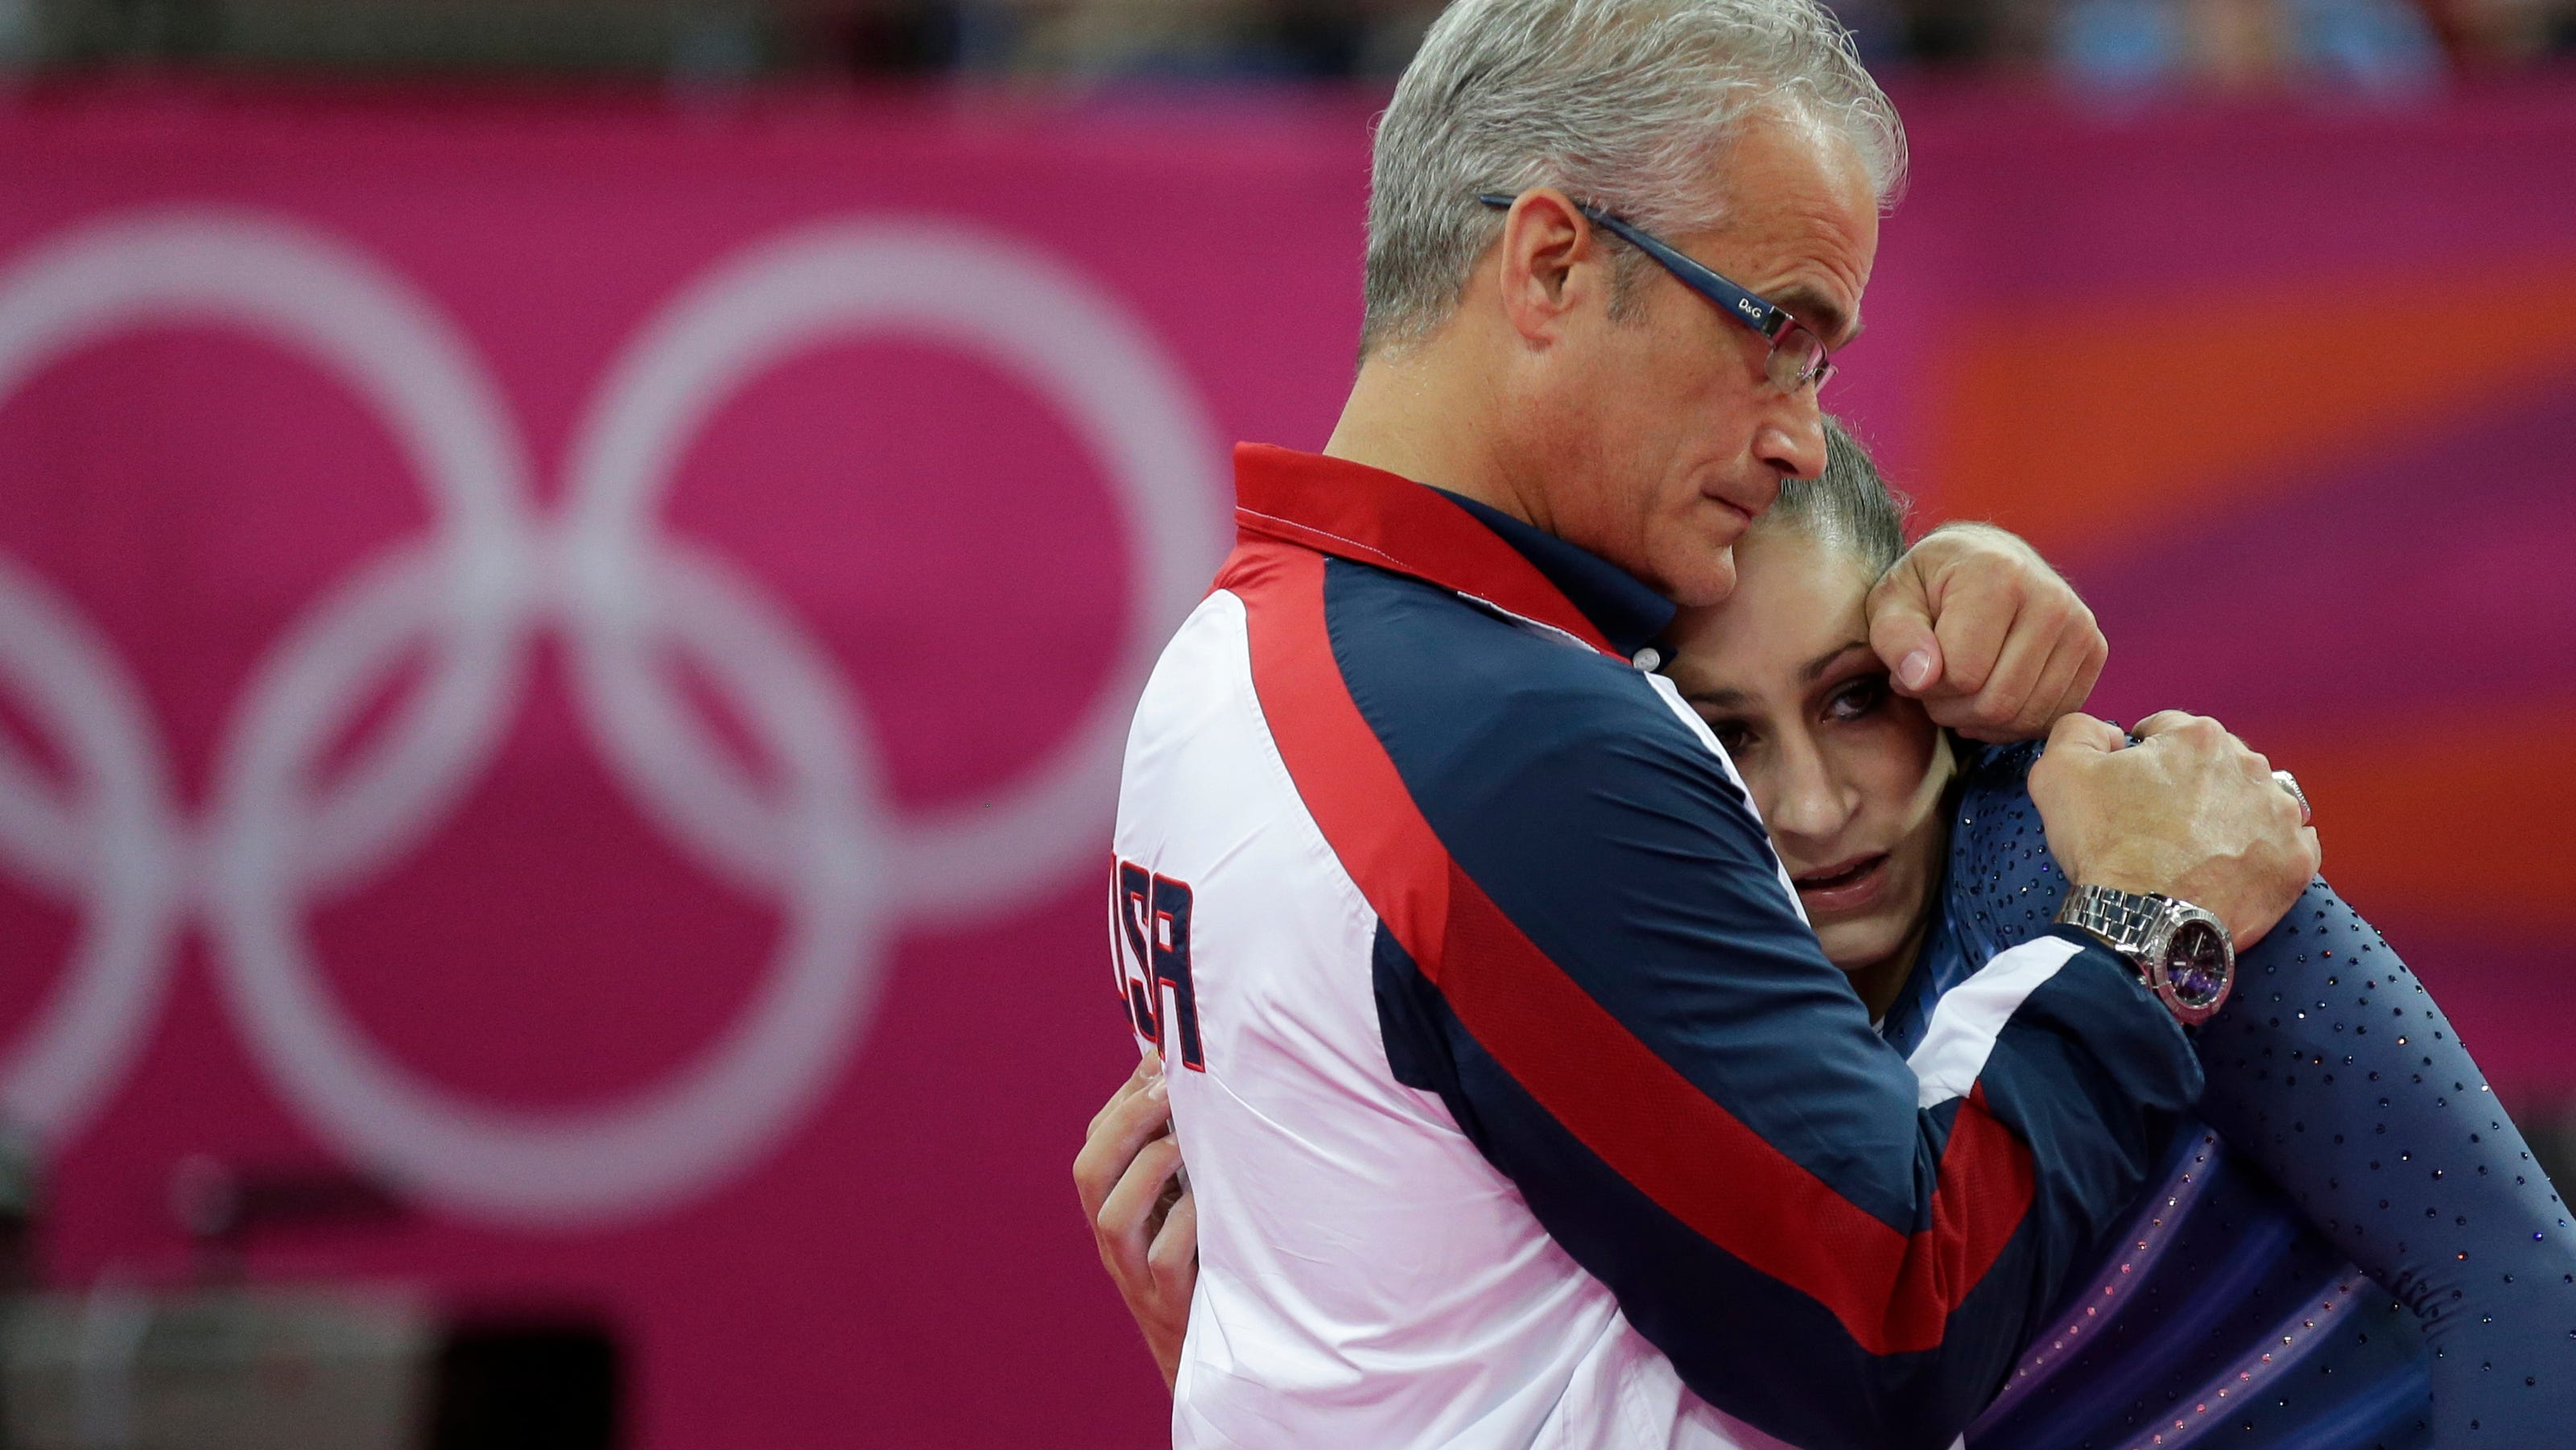 Ex-U.S. Olympics gymnastics coach with ties to Nassar kills himself after being charged - The Detroit News